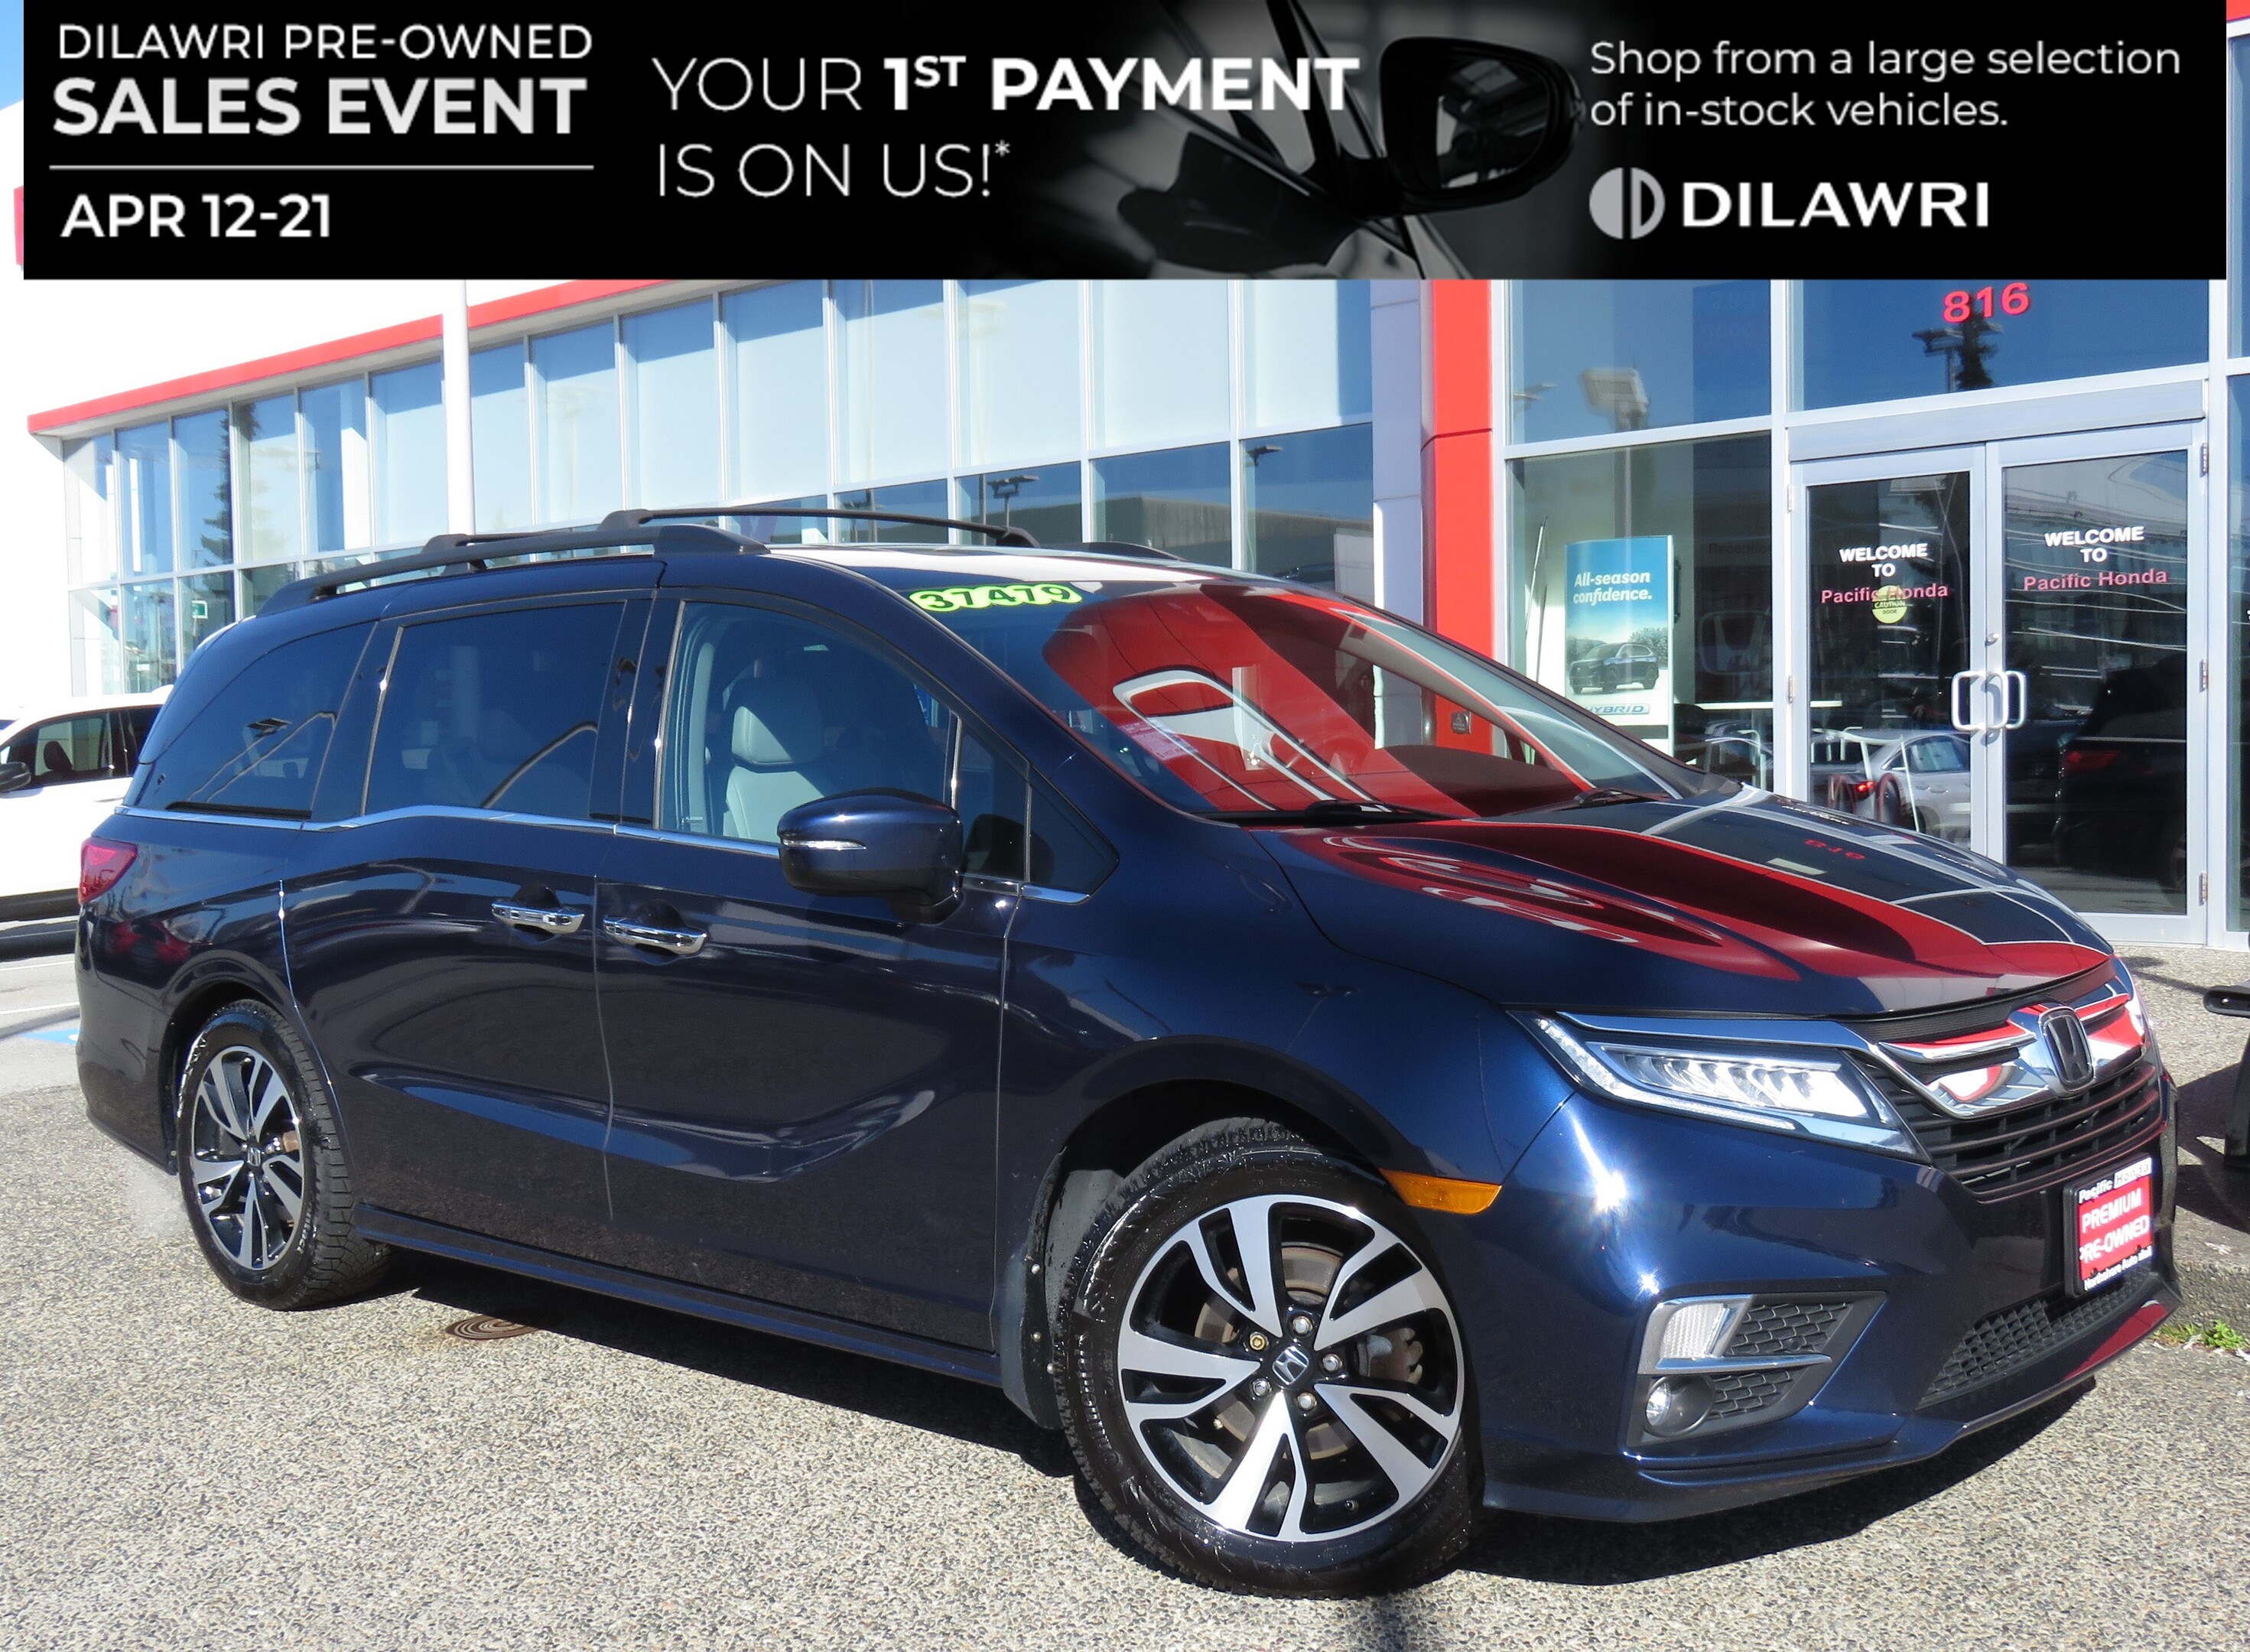 2019 Honda Odyssey TOURING | Dilawri Pre-owned Event ON Now! |